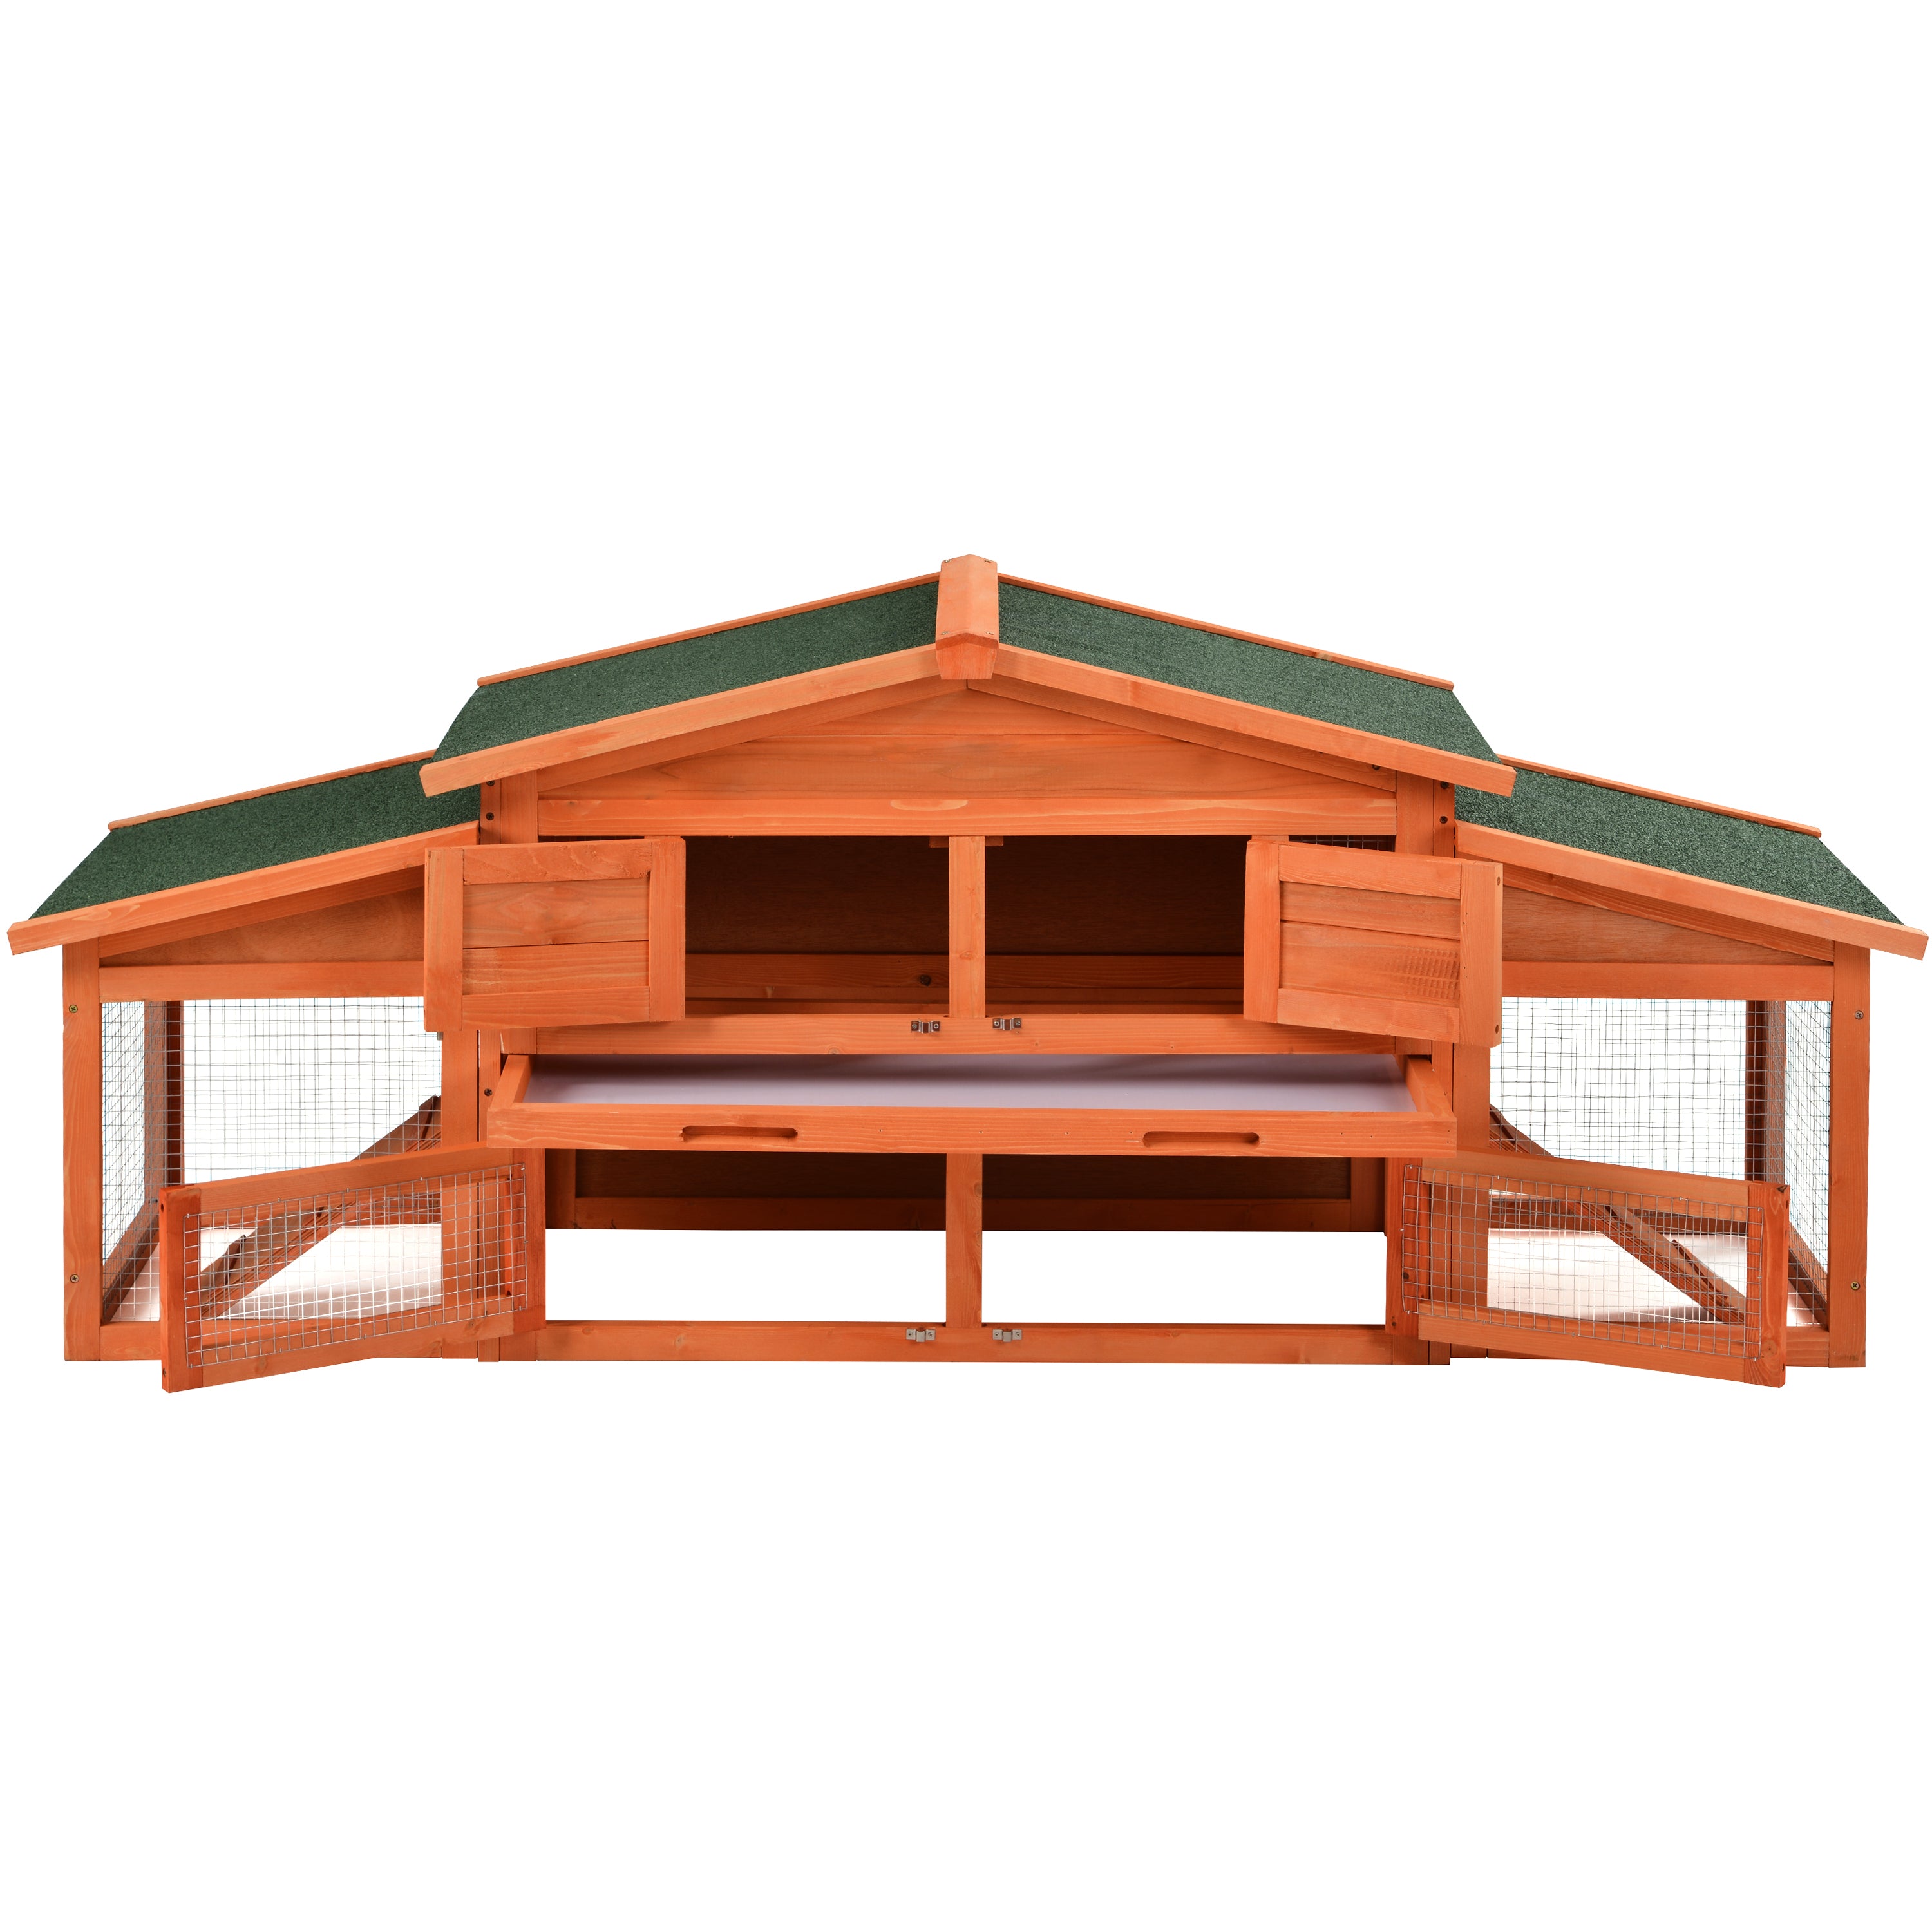 Wooden Chicken/Rabbit Coop 70-Inch Wood with 2 Run & Play Areas